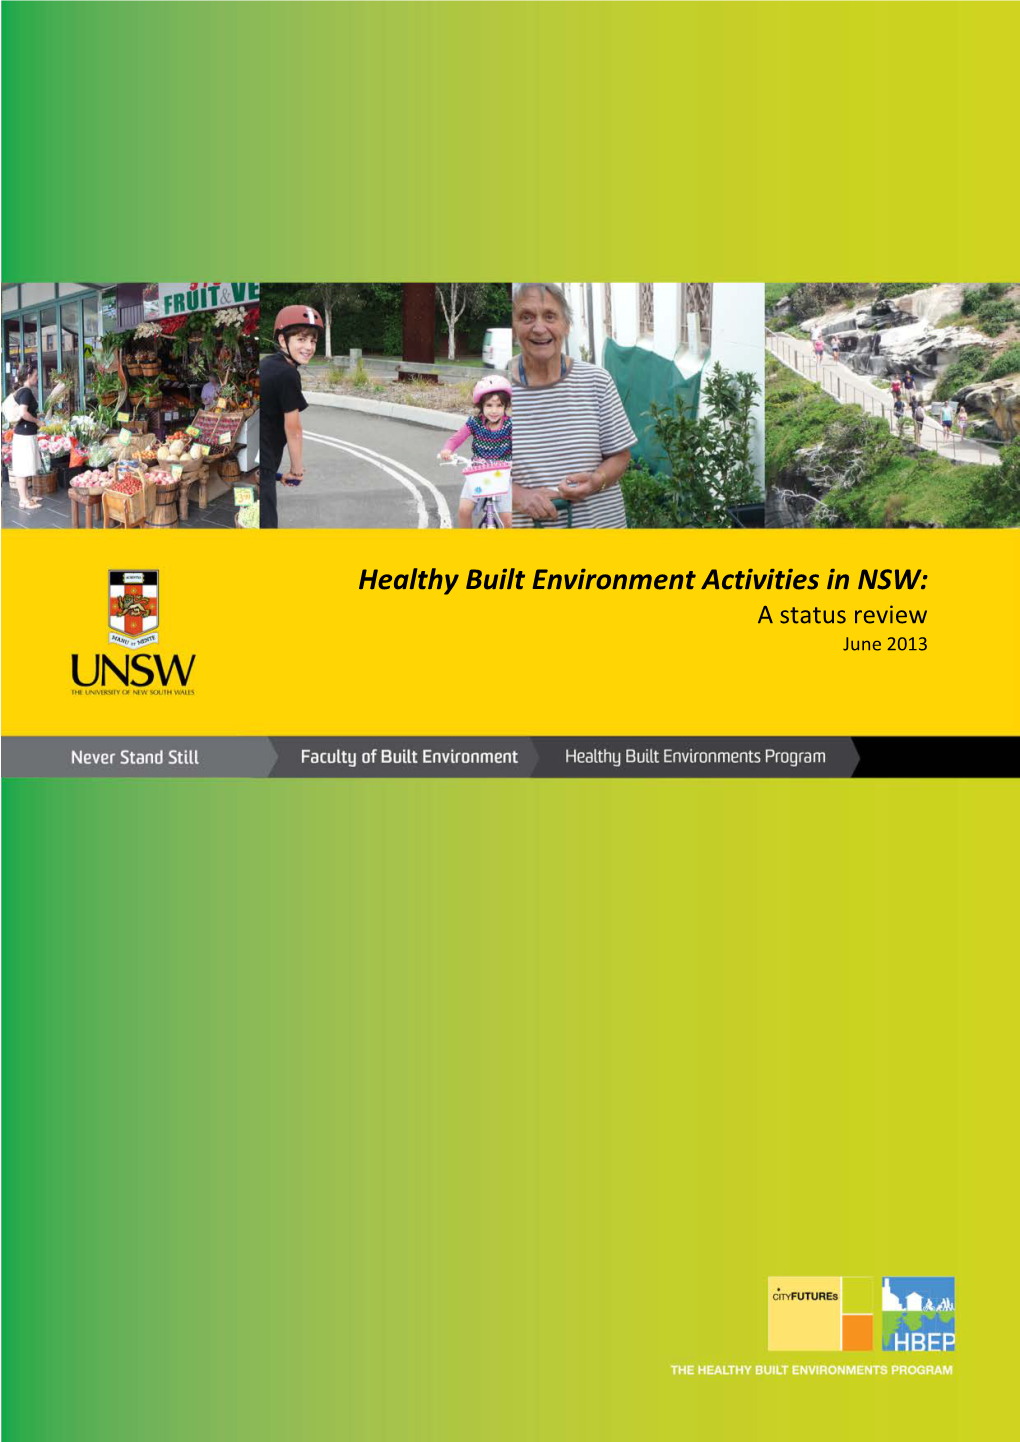 Healthy Built Environment Activities in NSW: a Status Review June 2013